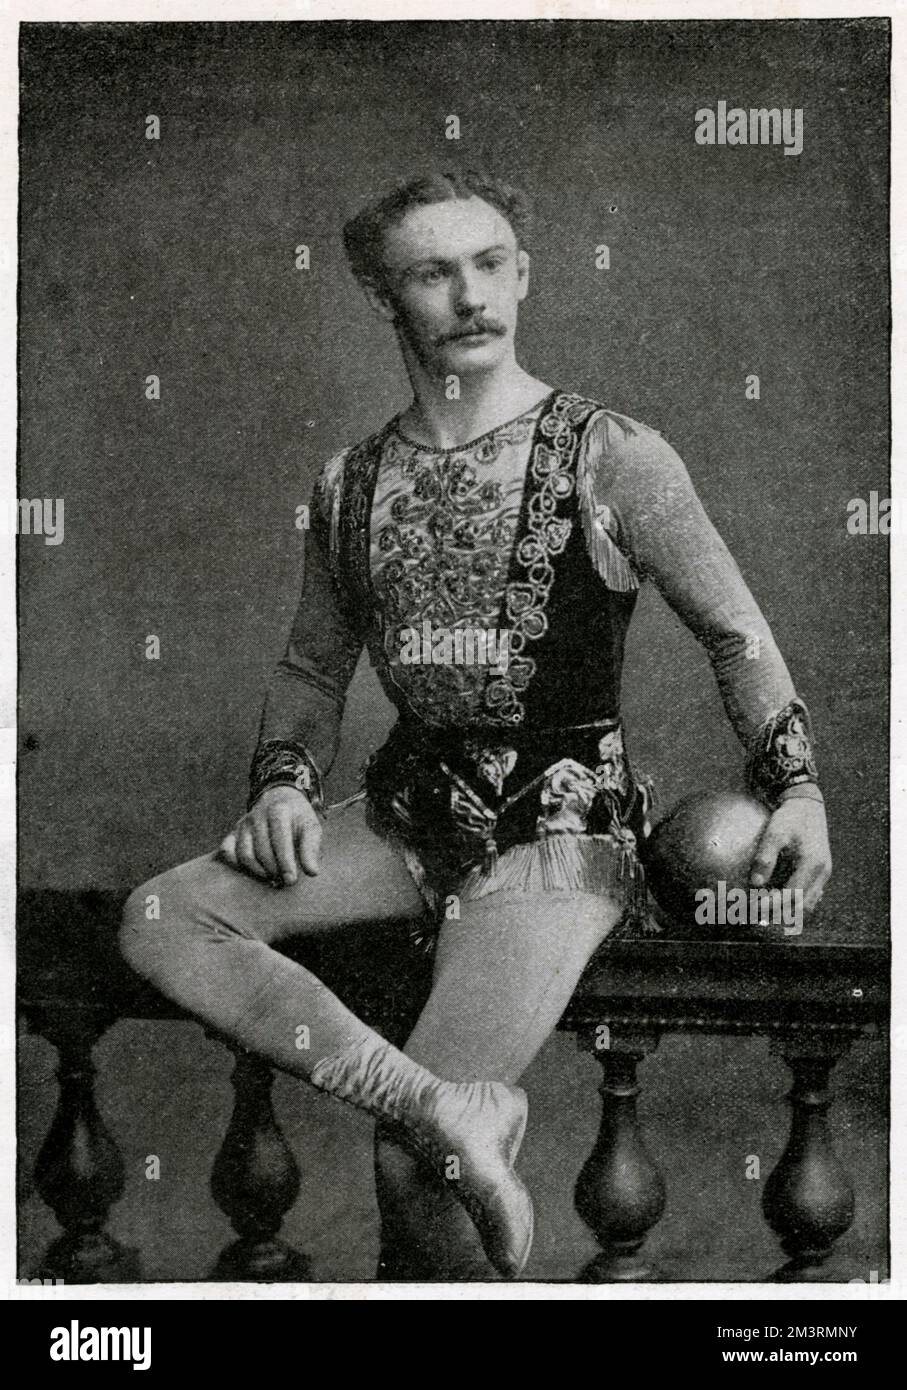 Paul Cinquevalli (1859 - 1918), German entertainer whose speciality juggling act was popular, known as (King of the Jugglers), who could catch a cannon ball on his neck, made him very popular in the English music halls.     Date: 1893 Stock Photo